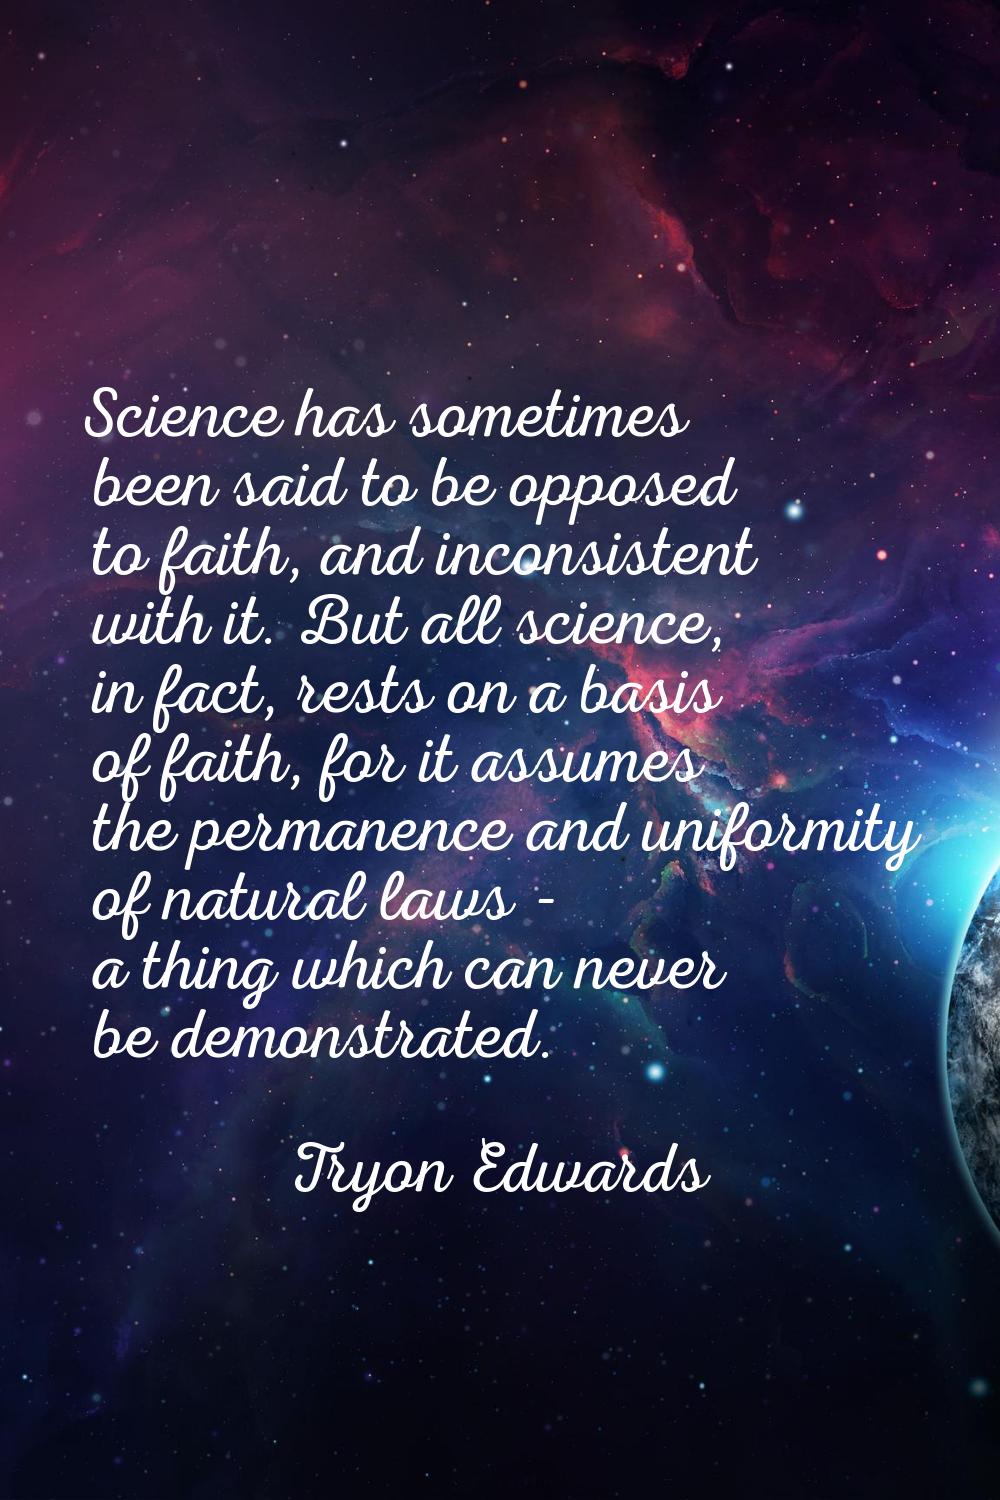 Science has sometimes been said to be opposed to faith, and inconsistent with it. But all science, 